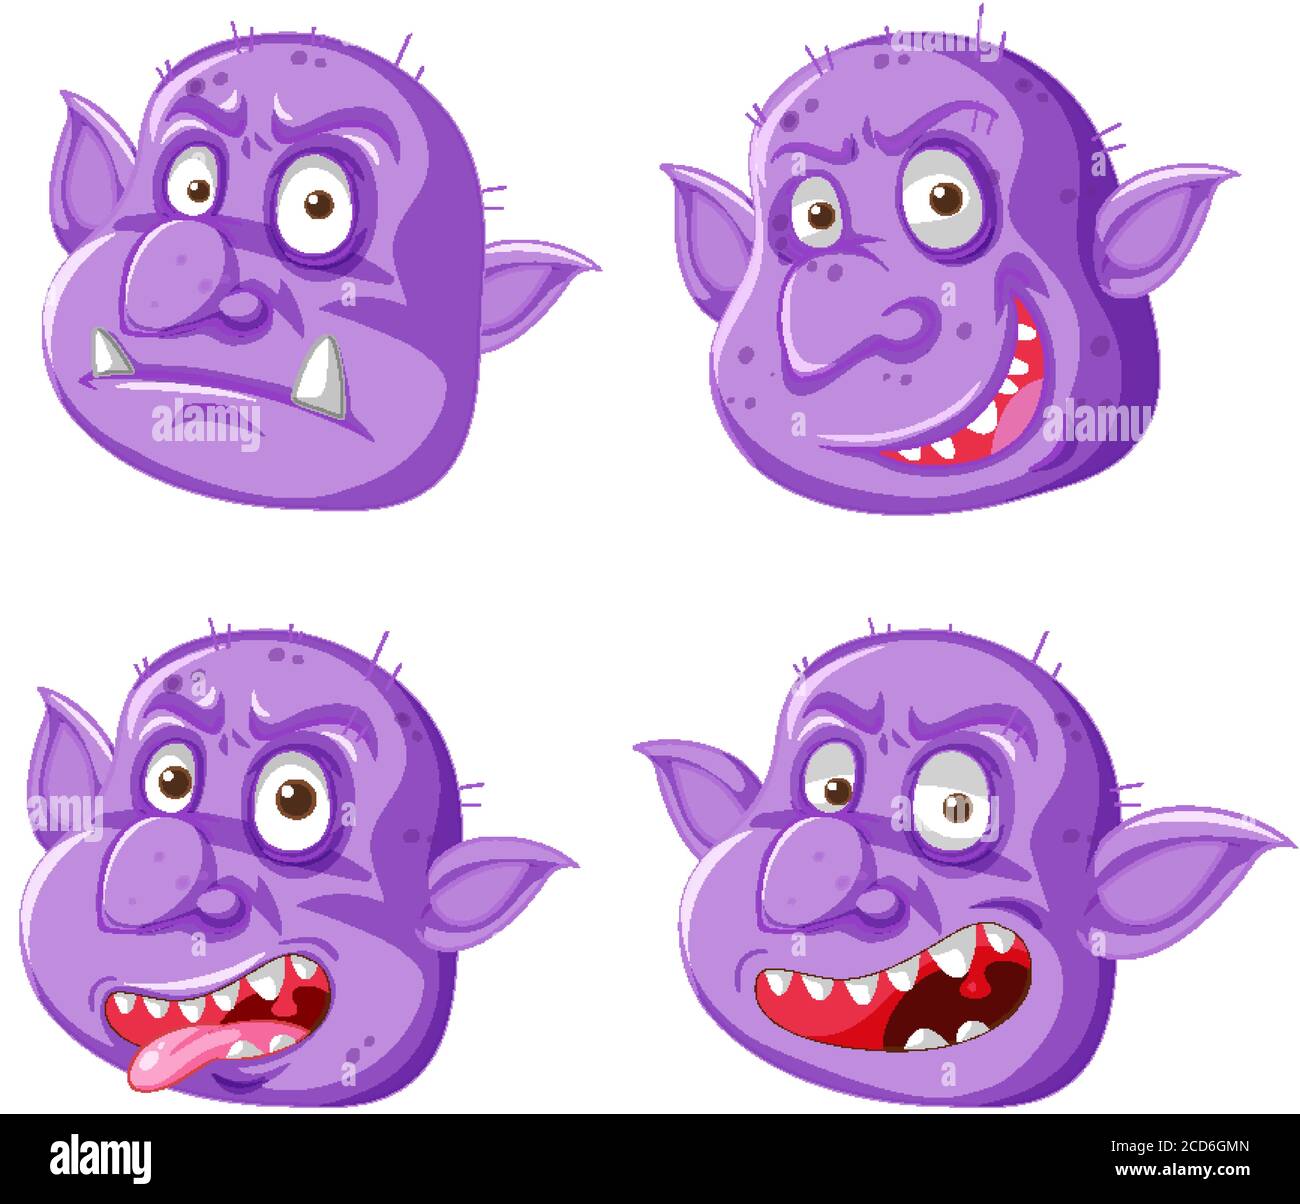 Set of purple goblin or troll face in different expressions in cartoon style isolated illustration Stock Vector